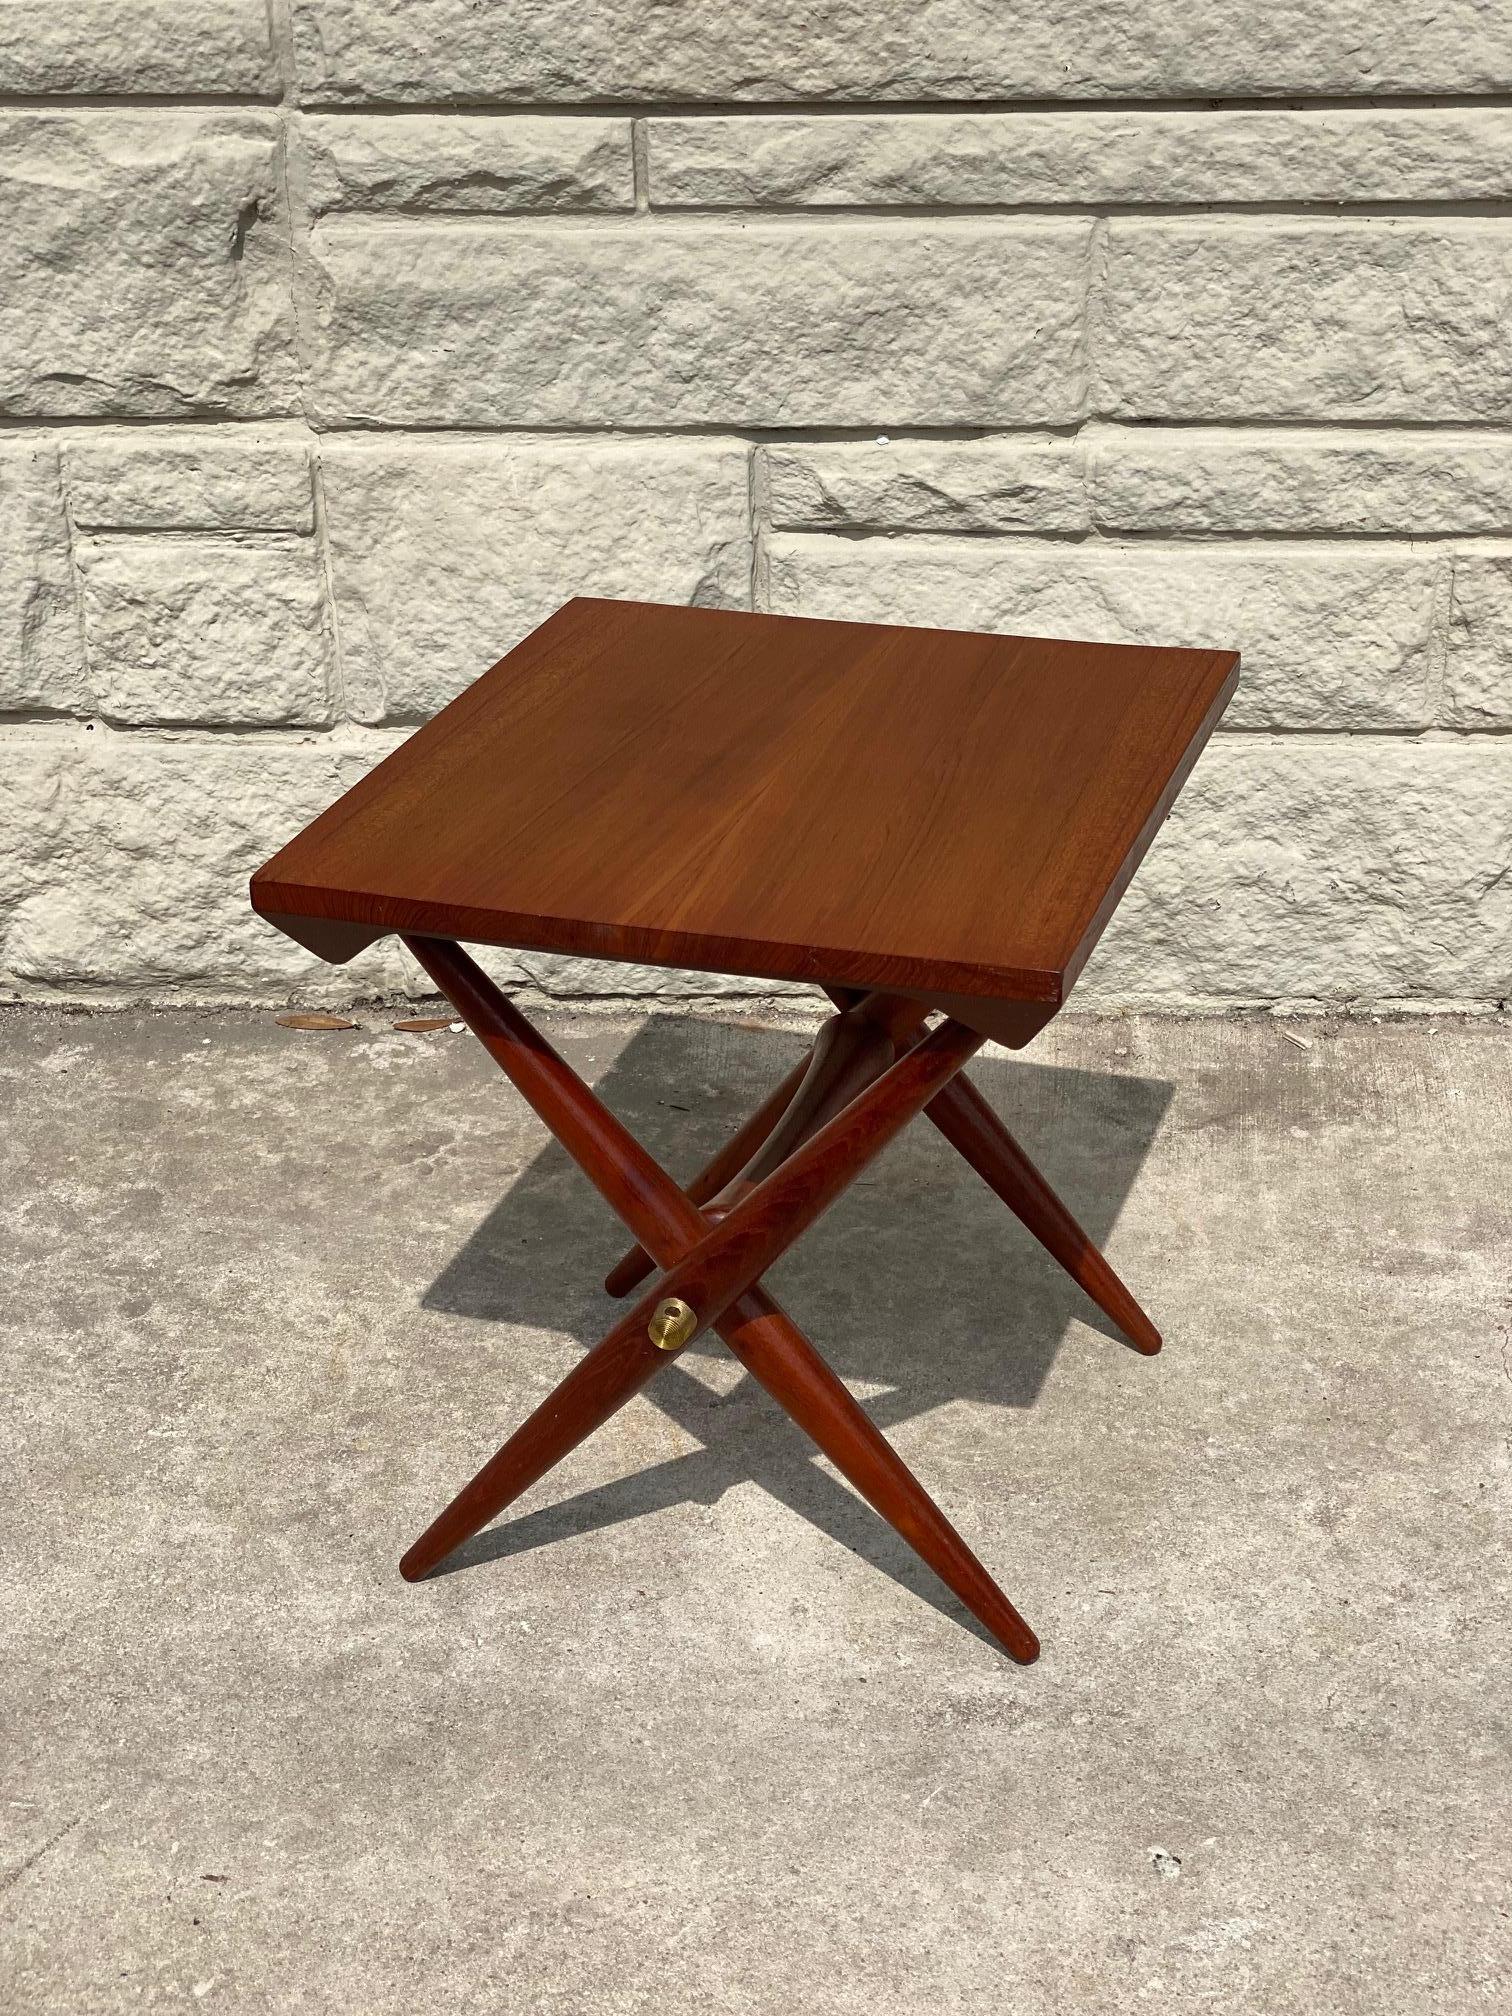 1960's teak side table designed by Danish sculptor and designer Jens Harald Quistgaard is finely crafted with teak legs and held with brass fittings. Makers mark is stamped onto the bottom of the table. This Danish teak table is in good condition.